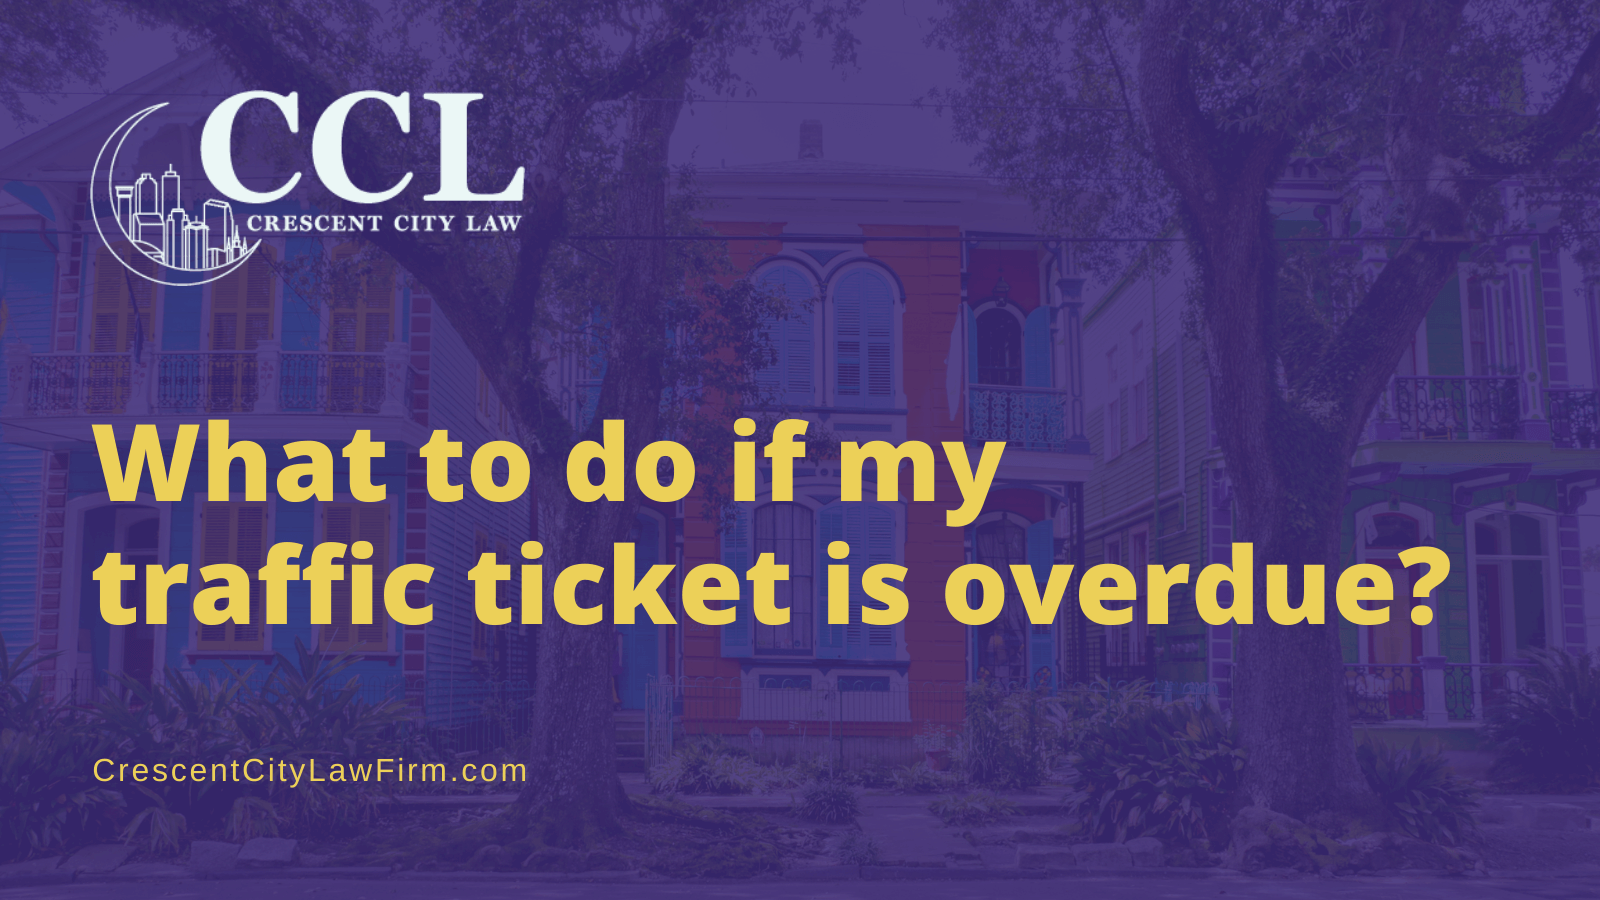 What to do if my traffic ticket is overdue - crescent city law firm - new orleans la